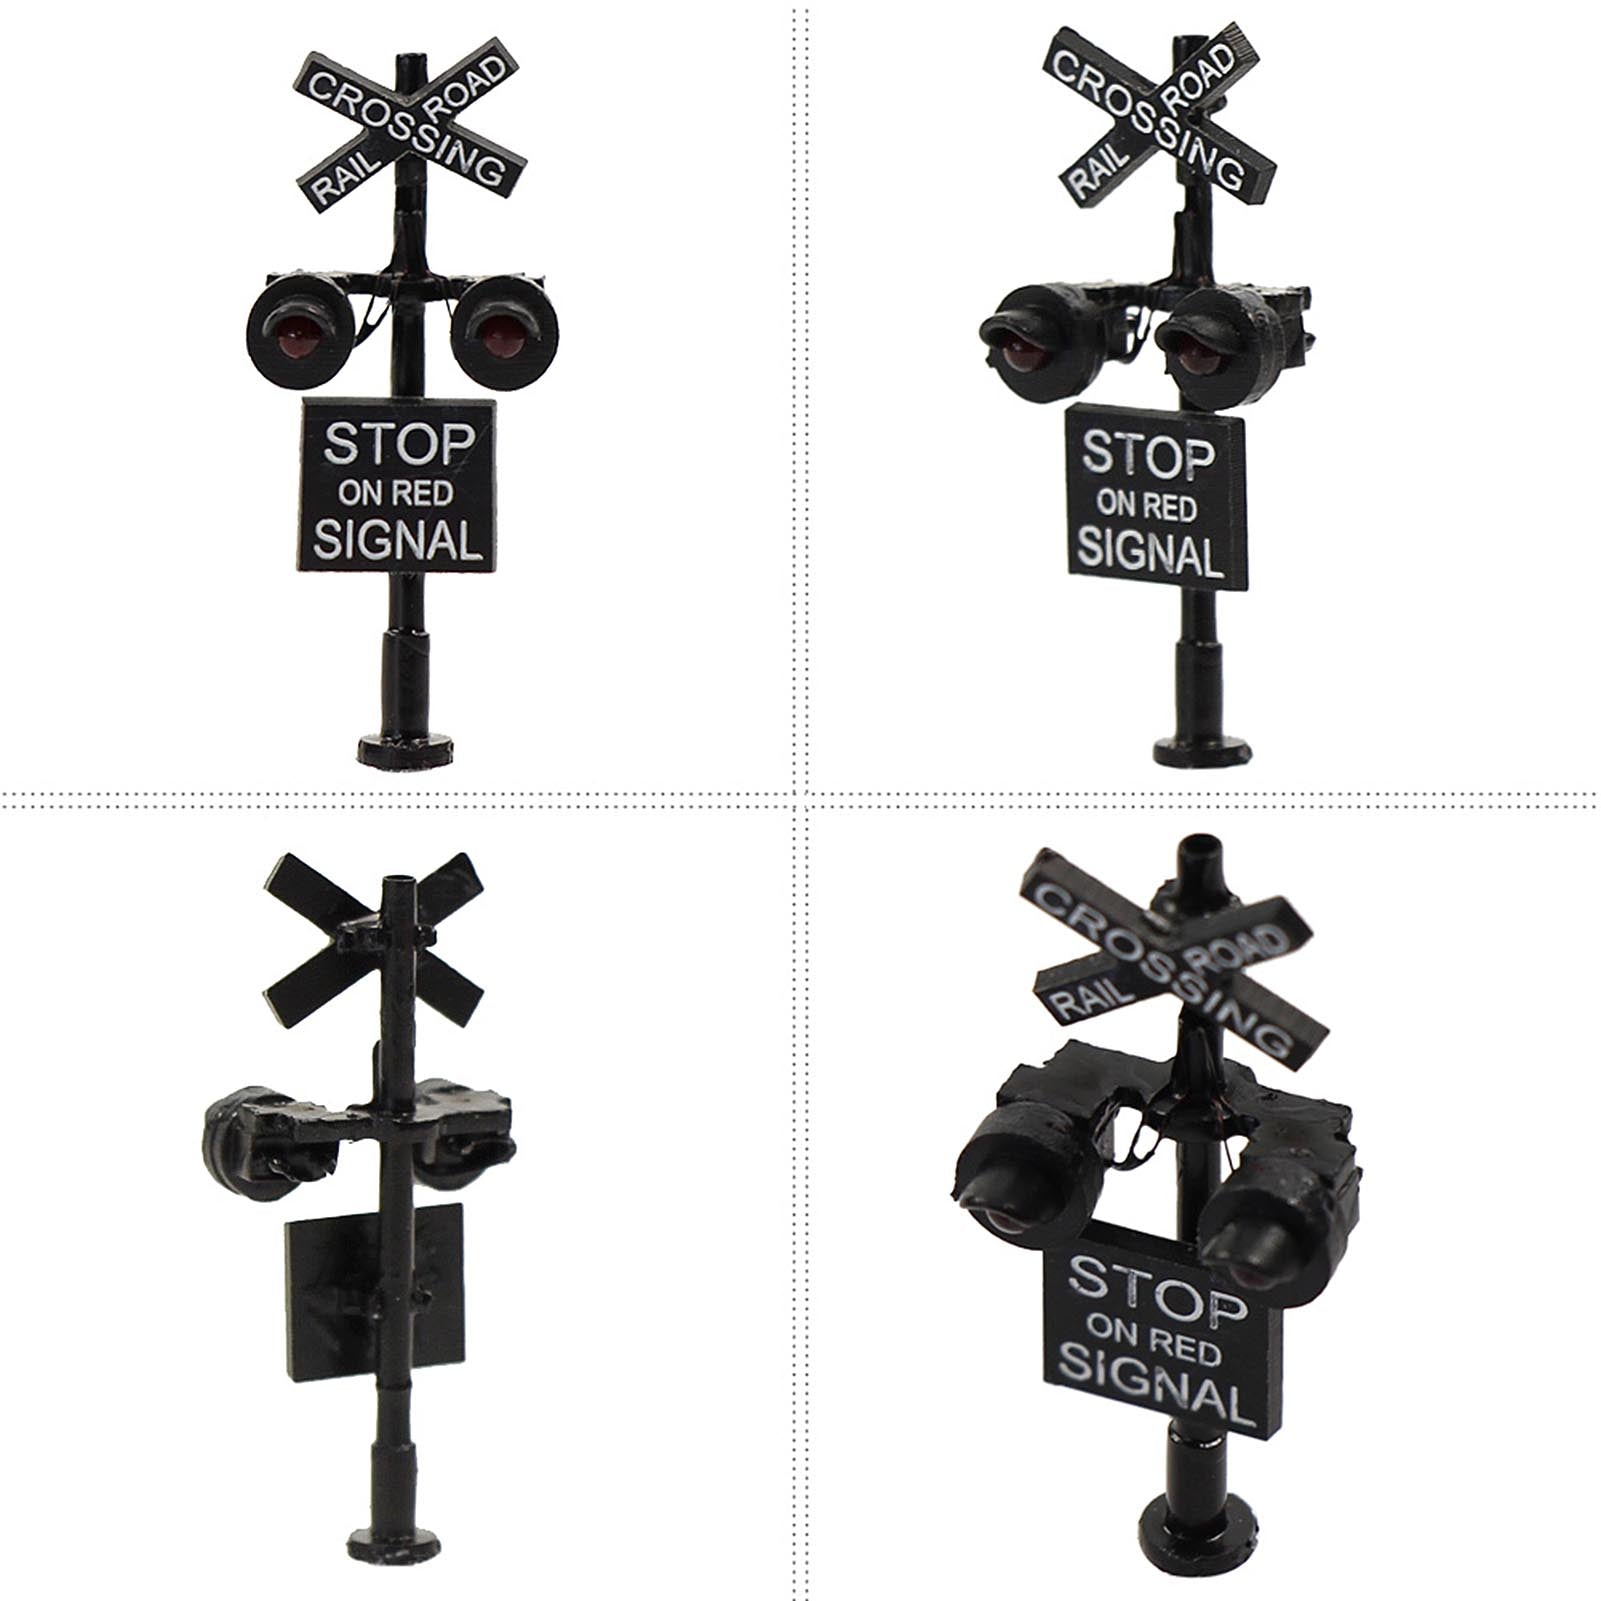 JTD1507RP 1 set N Scale 1:160 Railway Crossing Signal and Circuit Board Flasher